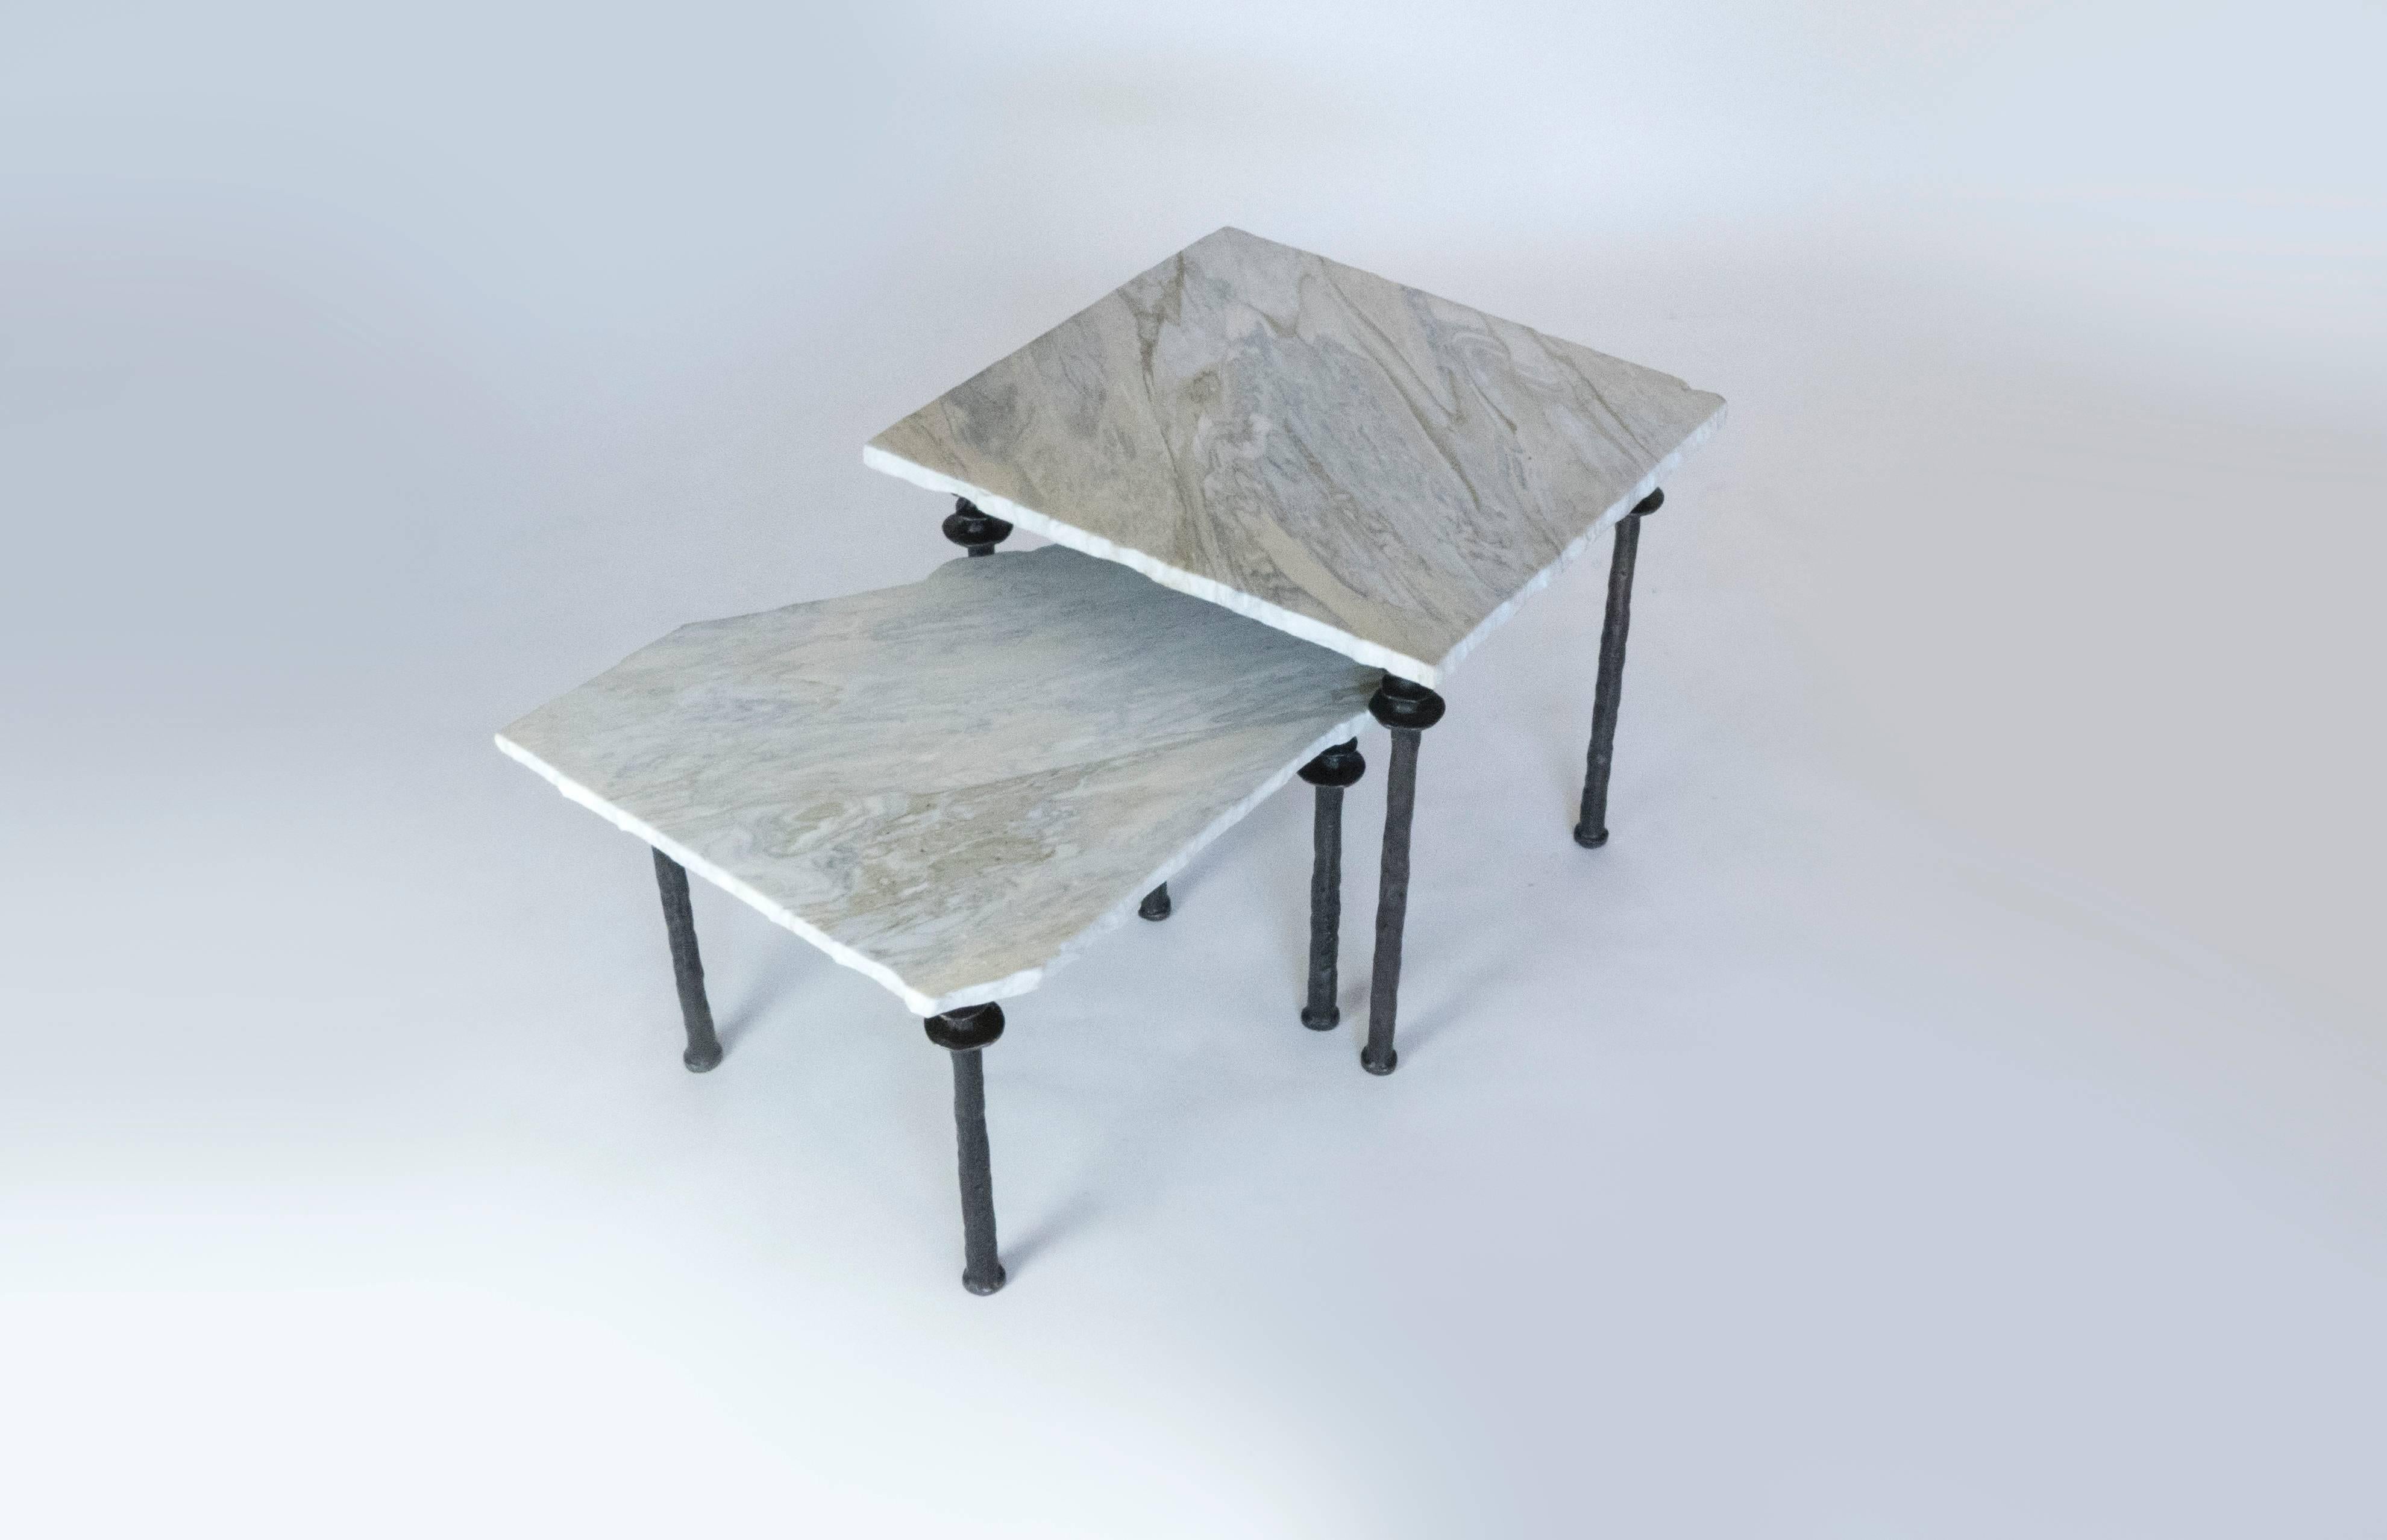 Two asymmetrical side tables with hand hewn marble tops. The legs are silicon cast bronze. Tables are of different heights. They can be arranged in various configurations. Largest table is H: 18